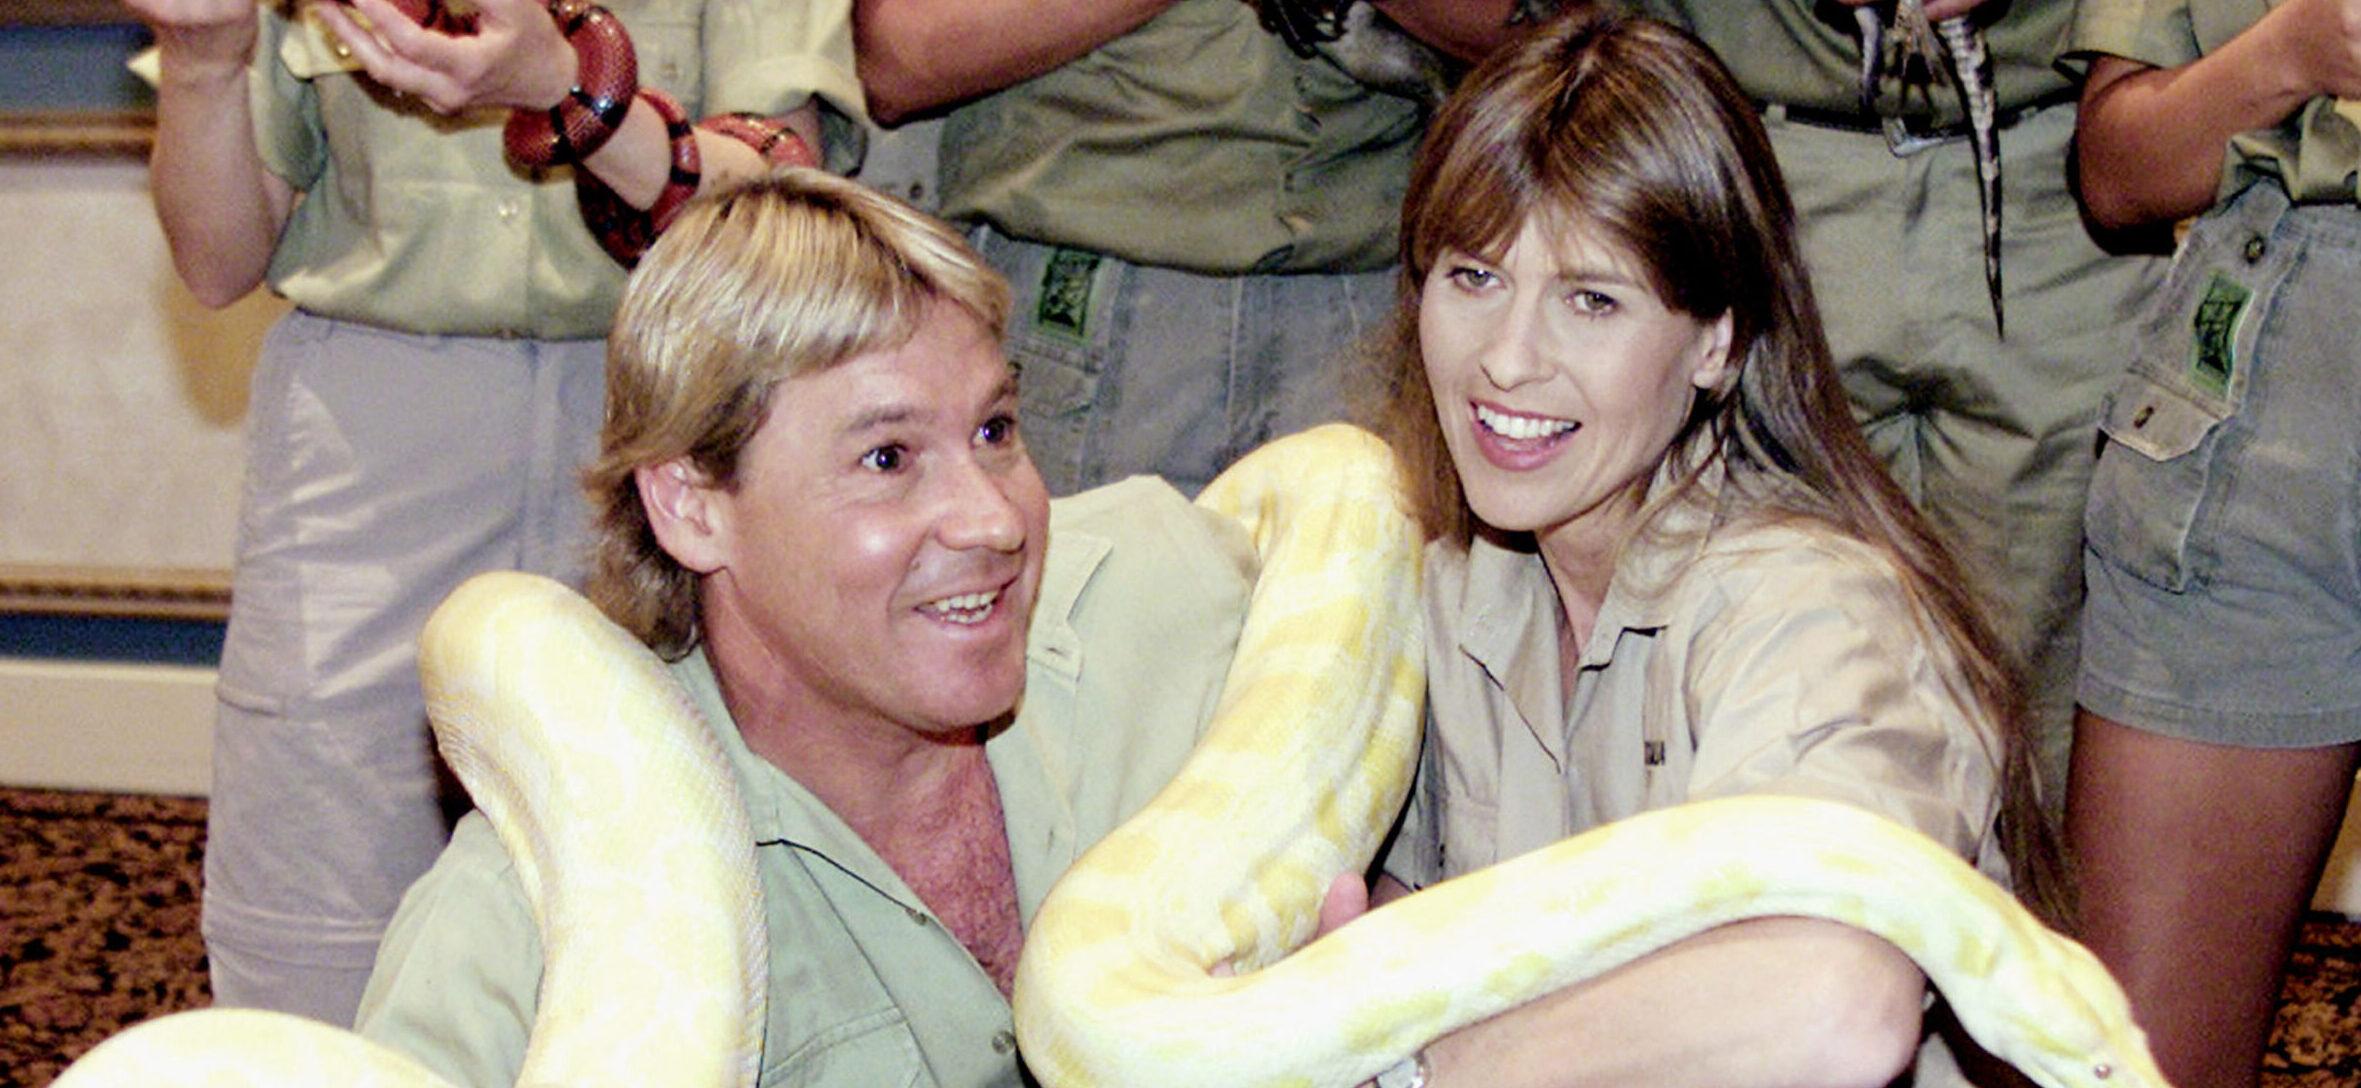 Steve Irwin and his wife Terri demonstrate a 16 foot Anaconda snake that will be used in their forthcoming movie 